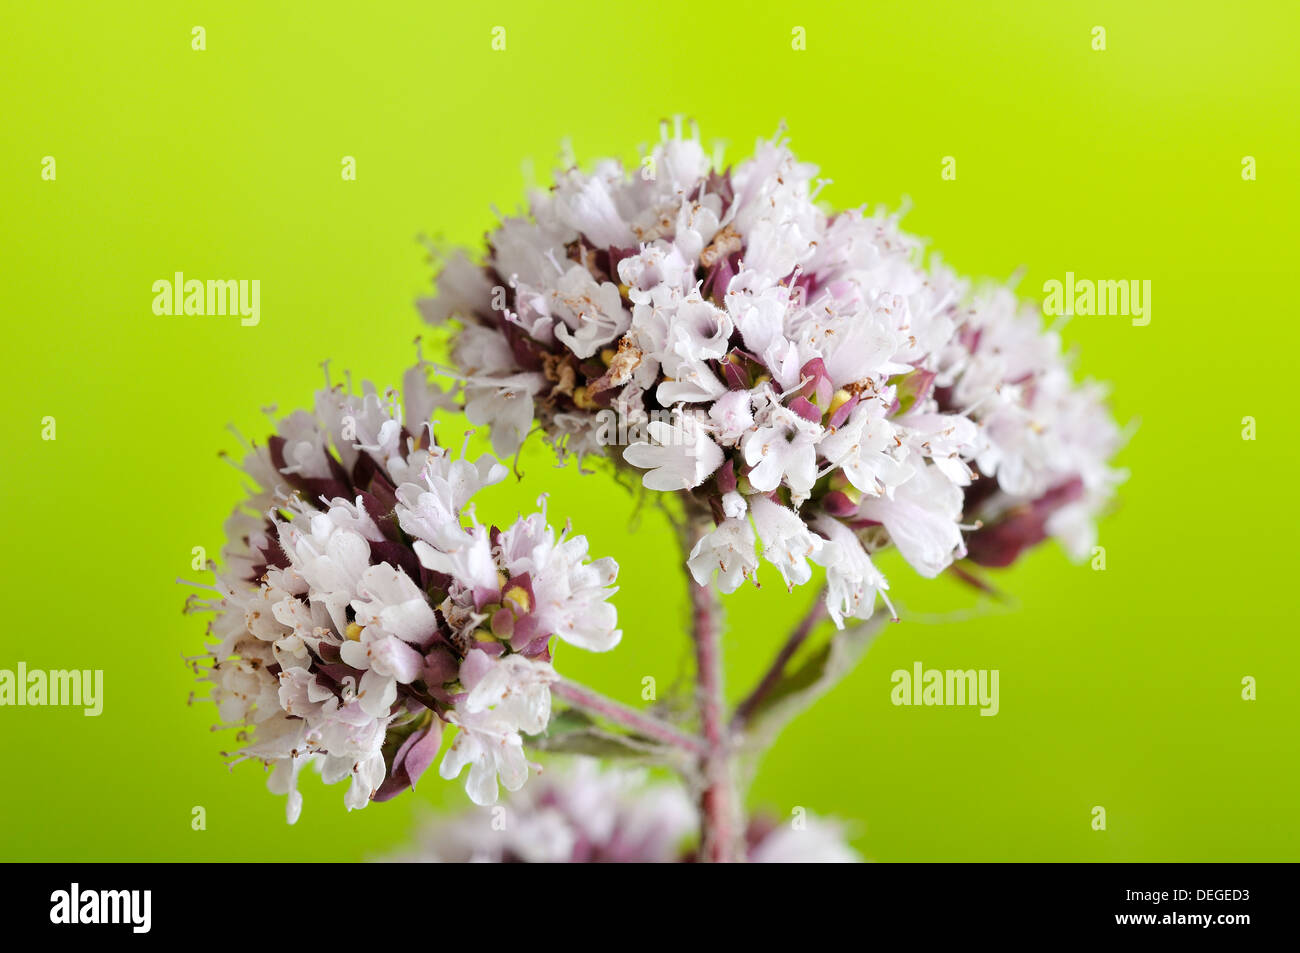 Oregano, Origanum vulgare, horizontal portrait of flowers with out of focus background. Stock Photo